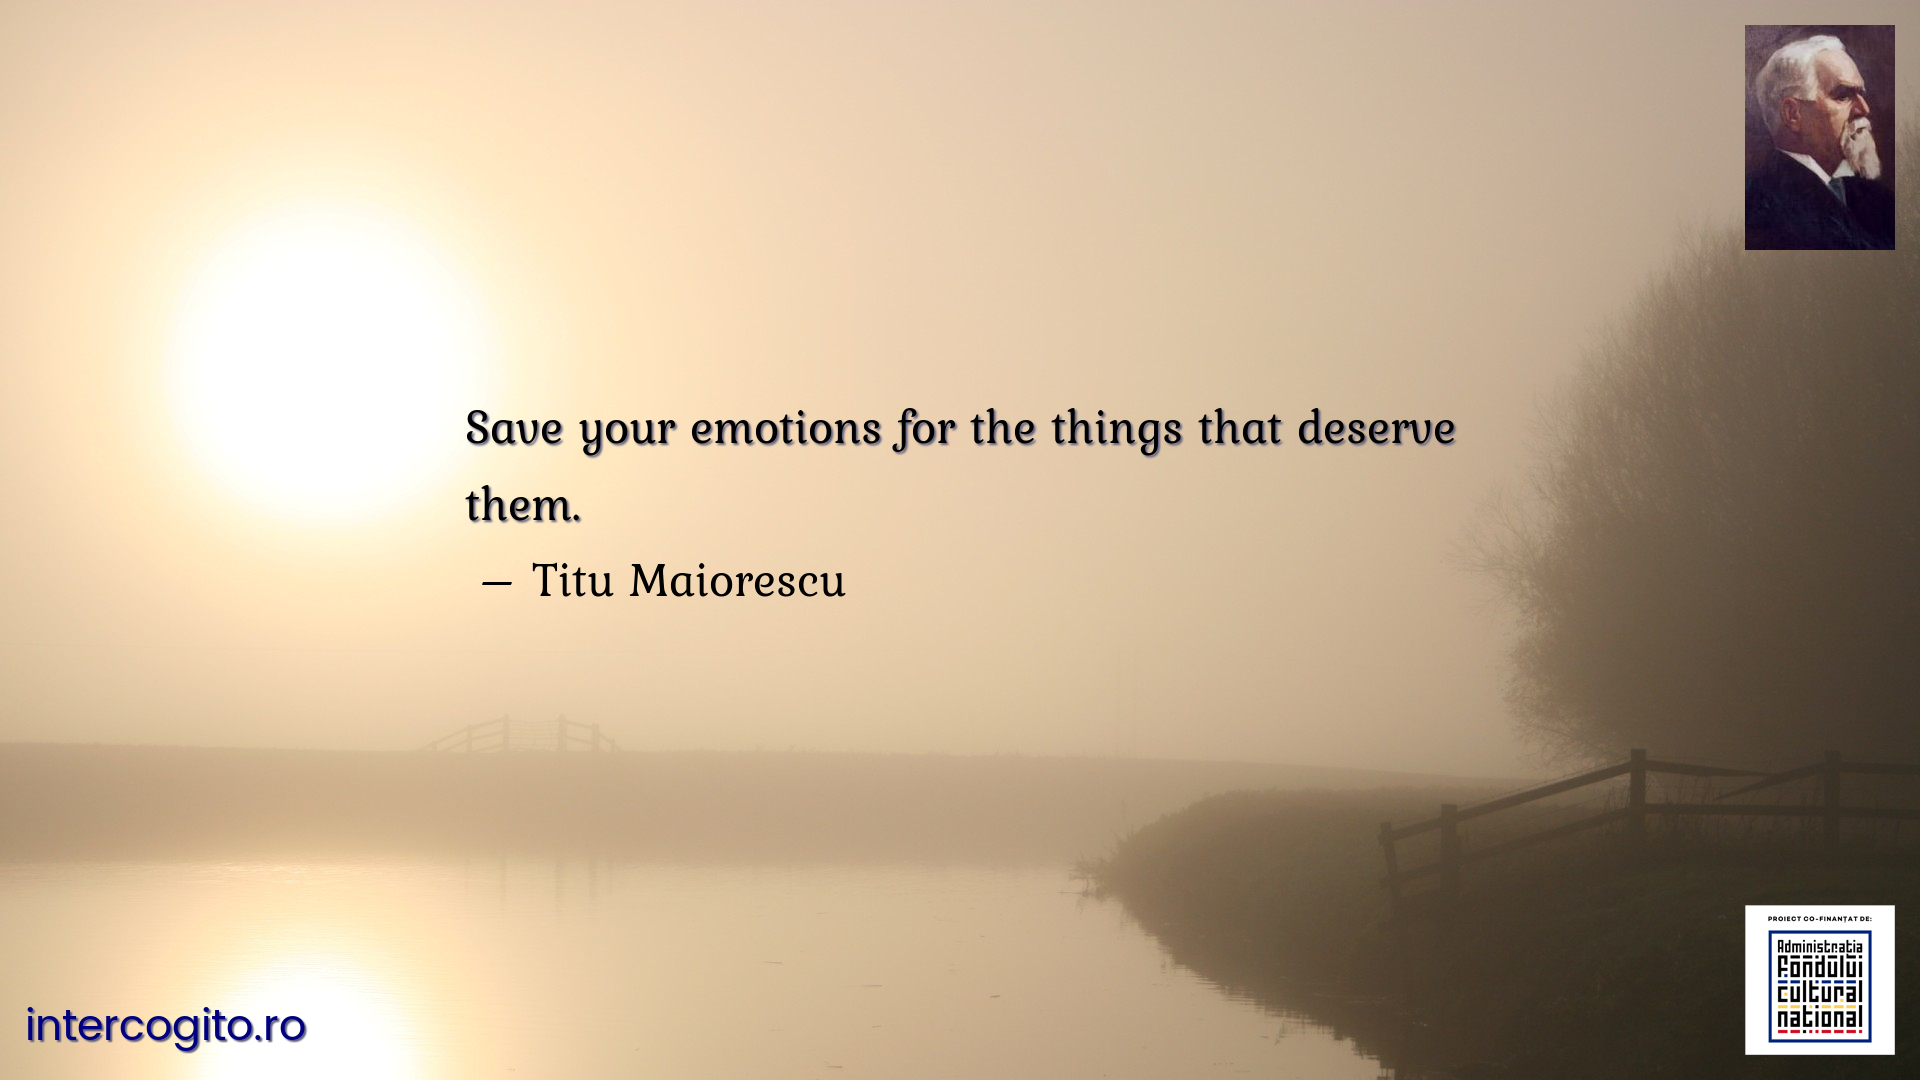 Save your emotions for the things that deserve them.